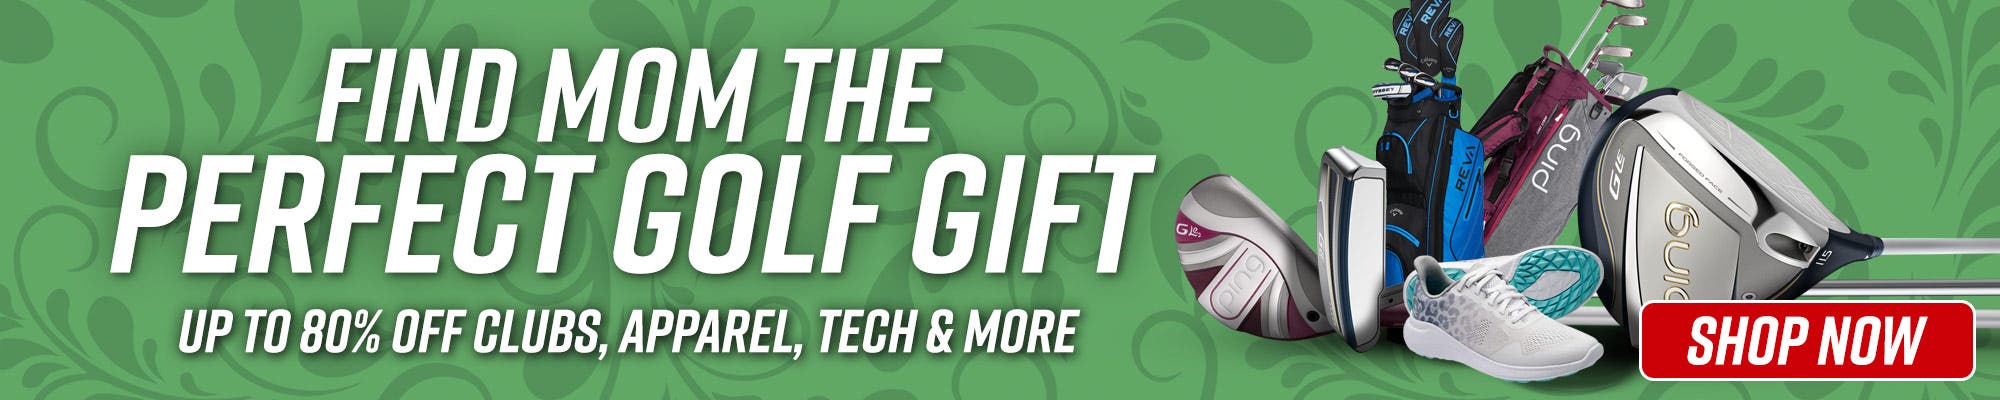 find mom the perfect golf gift| Save up to 80% on clubs, apparel, tech & more | Shop Now